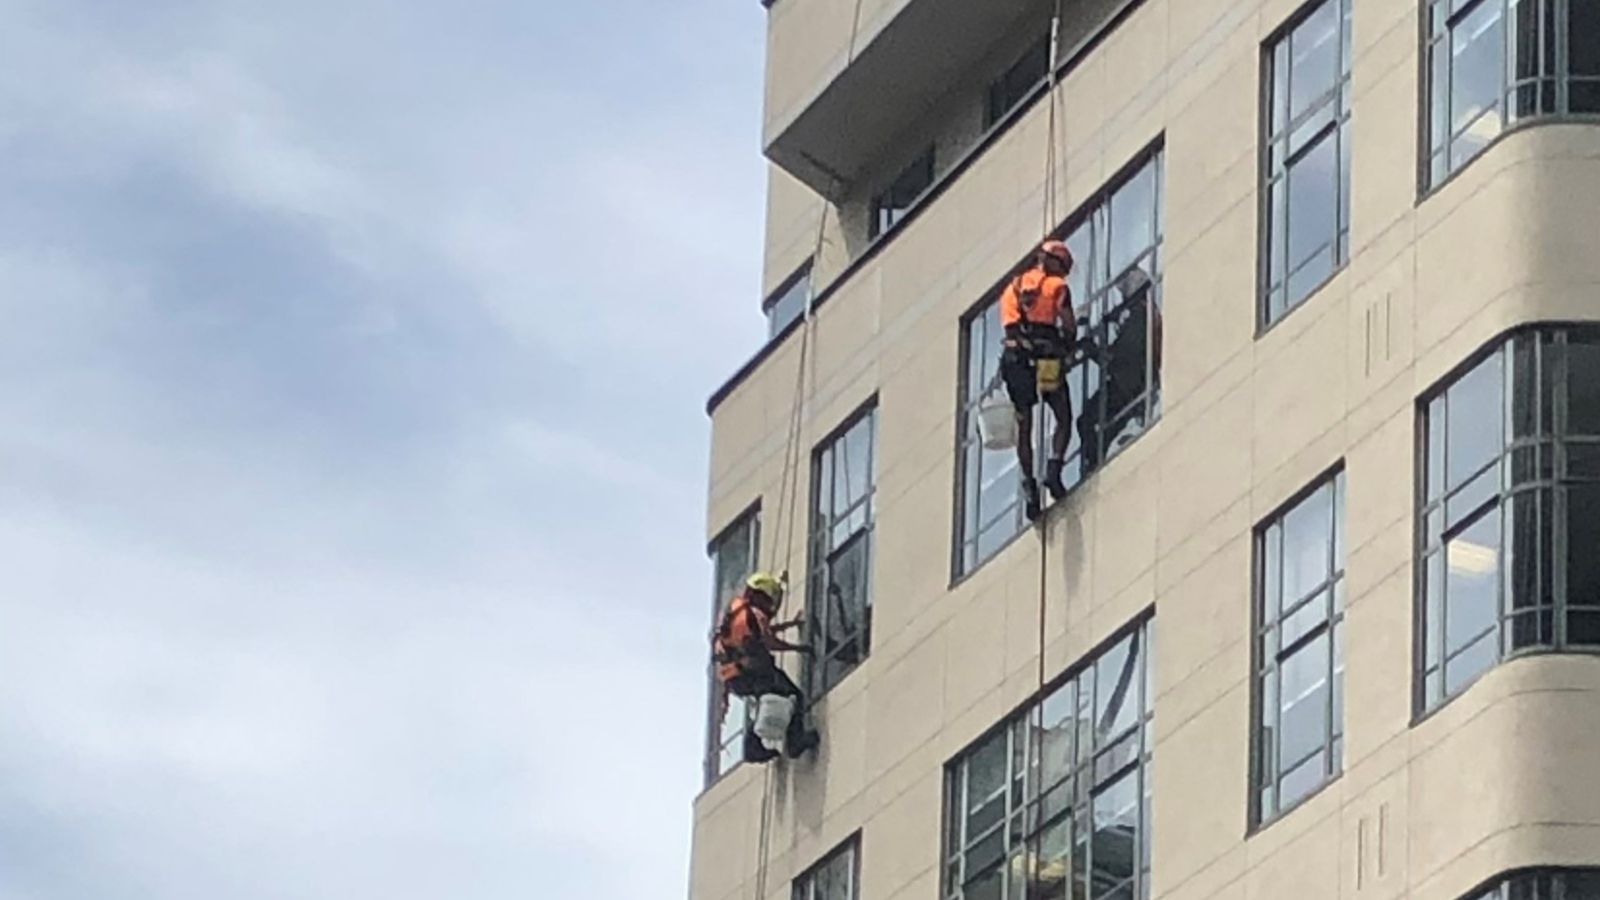 Two people abseiling from the roof of a building to clean the windows